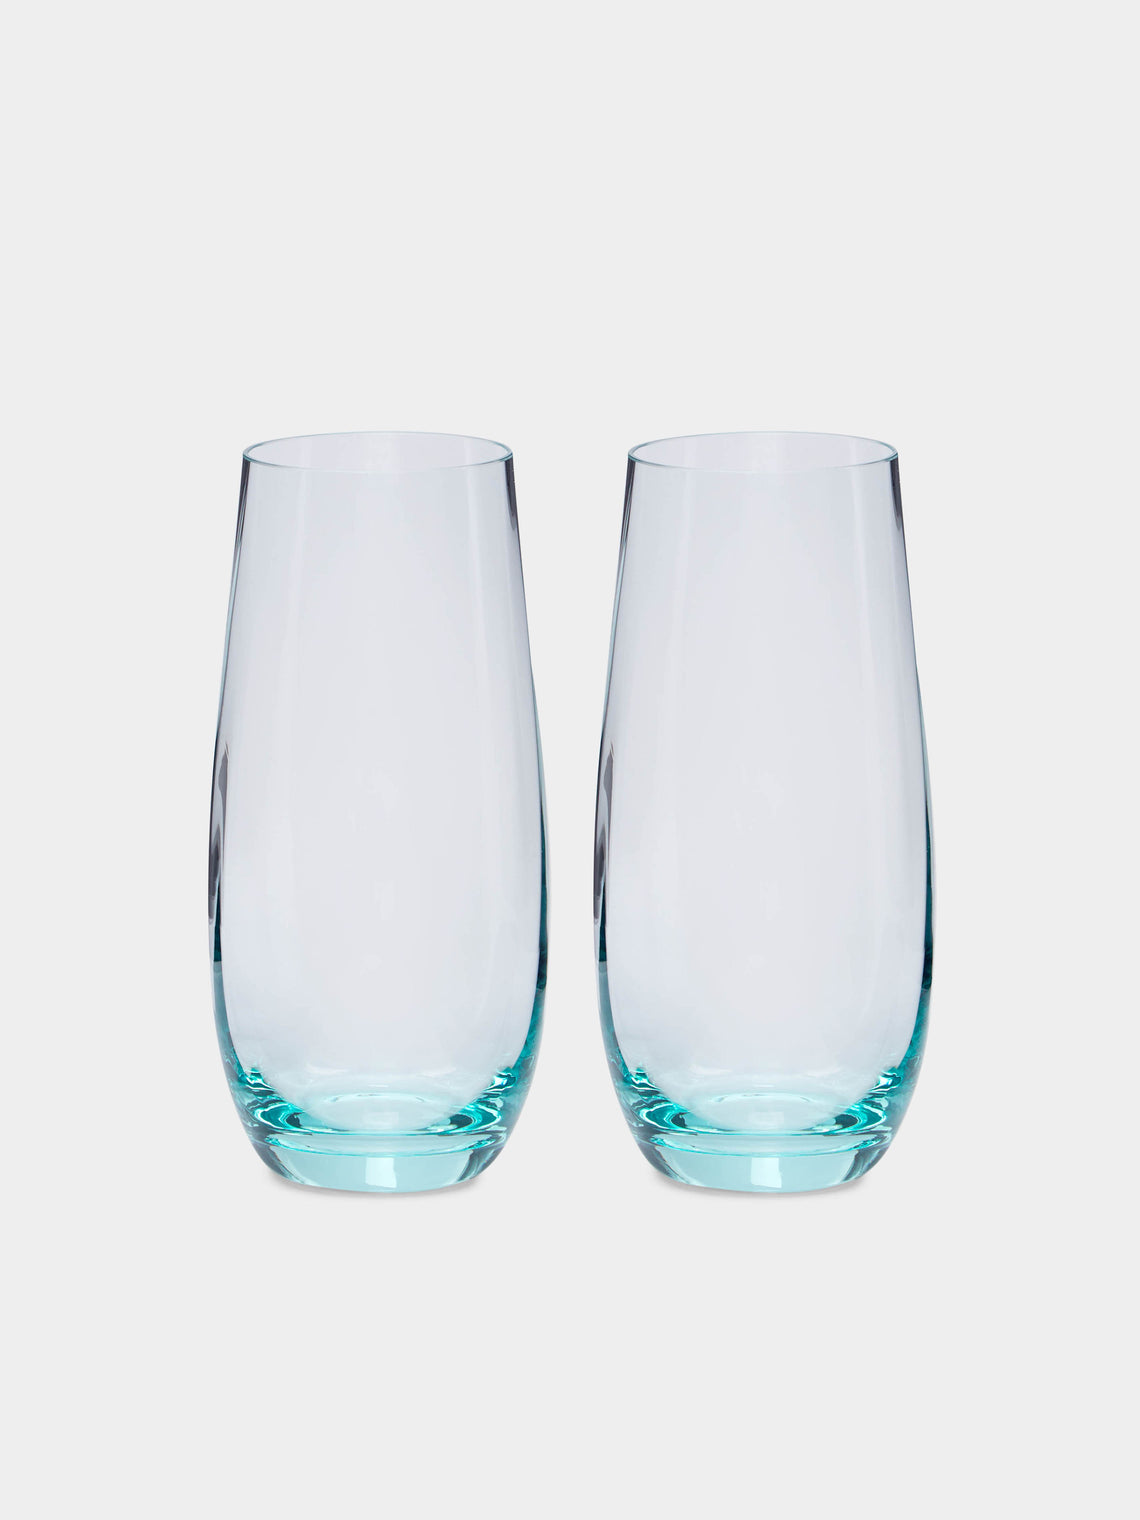 Moser - Optic Hand-Blown Crystal Water Glasses (Set of 2) -  - ABASK